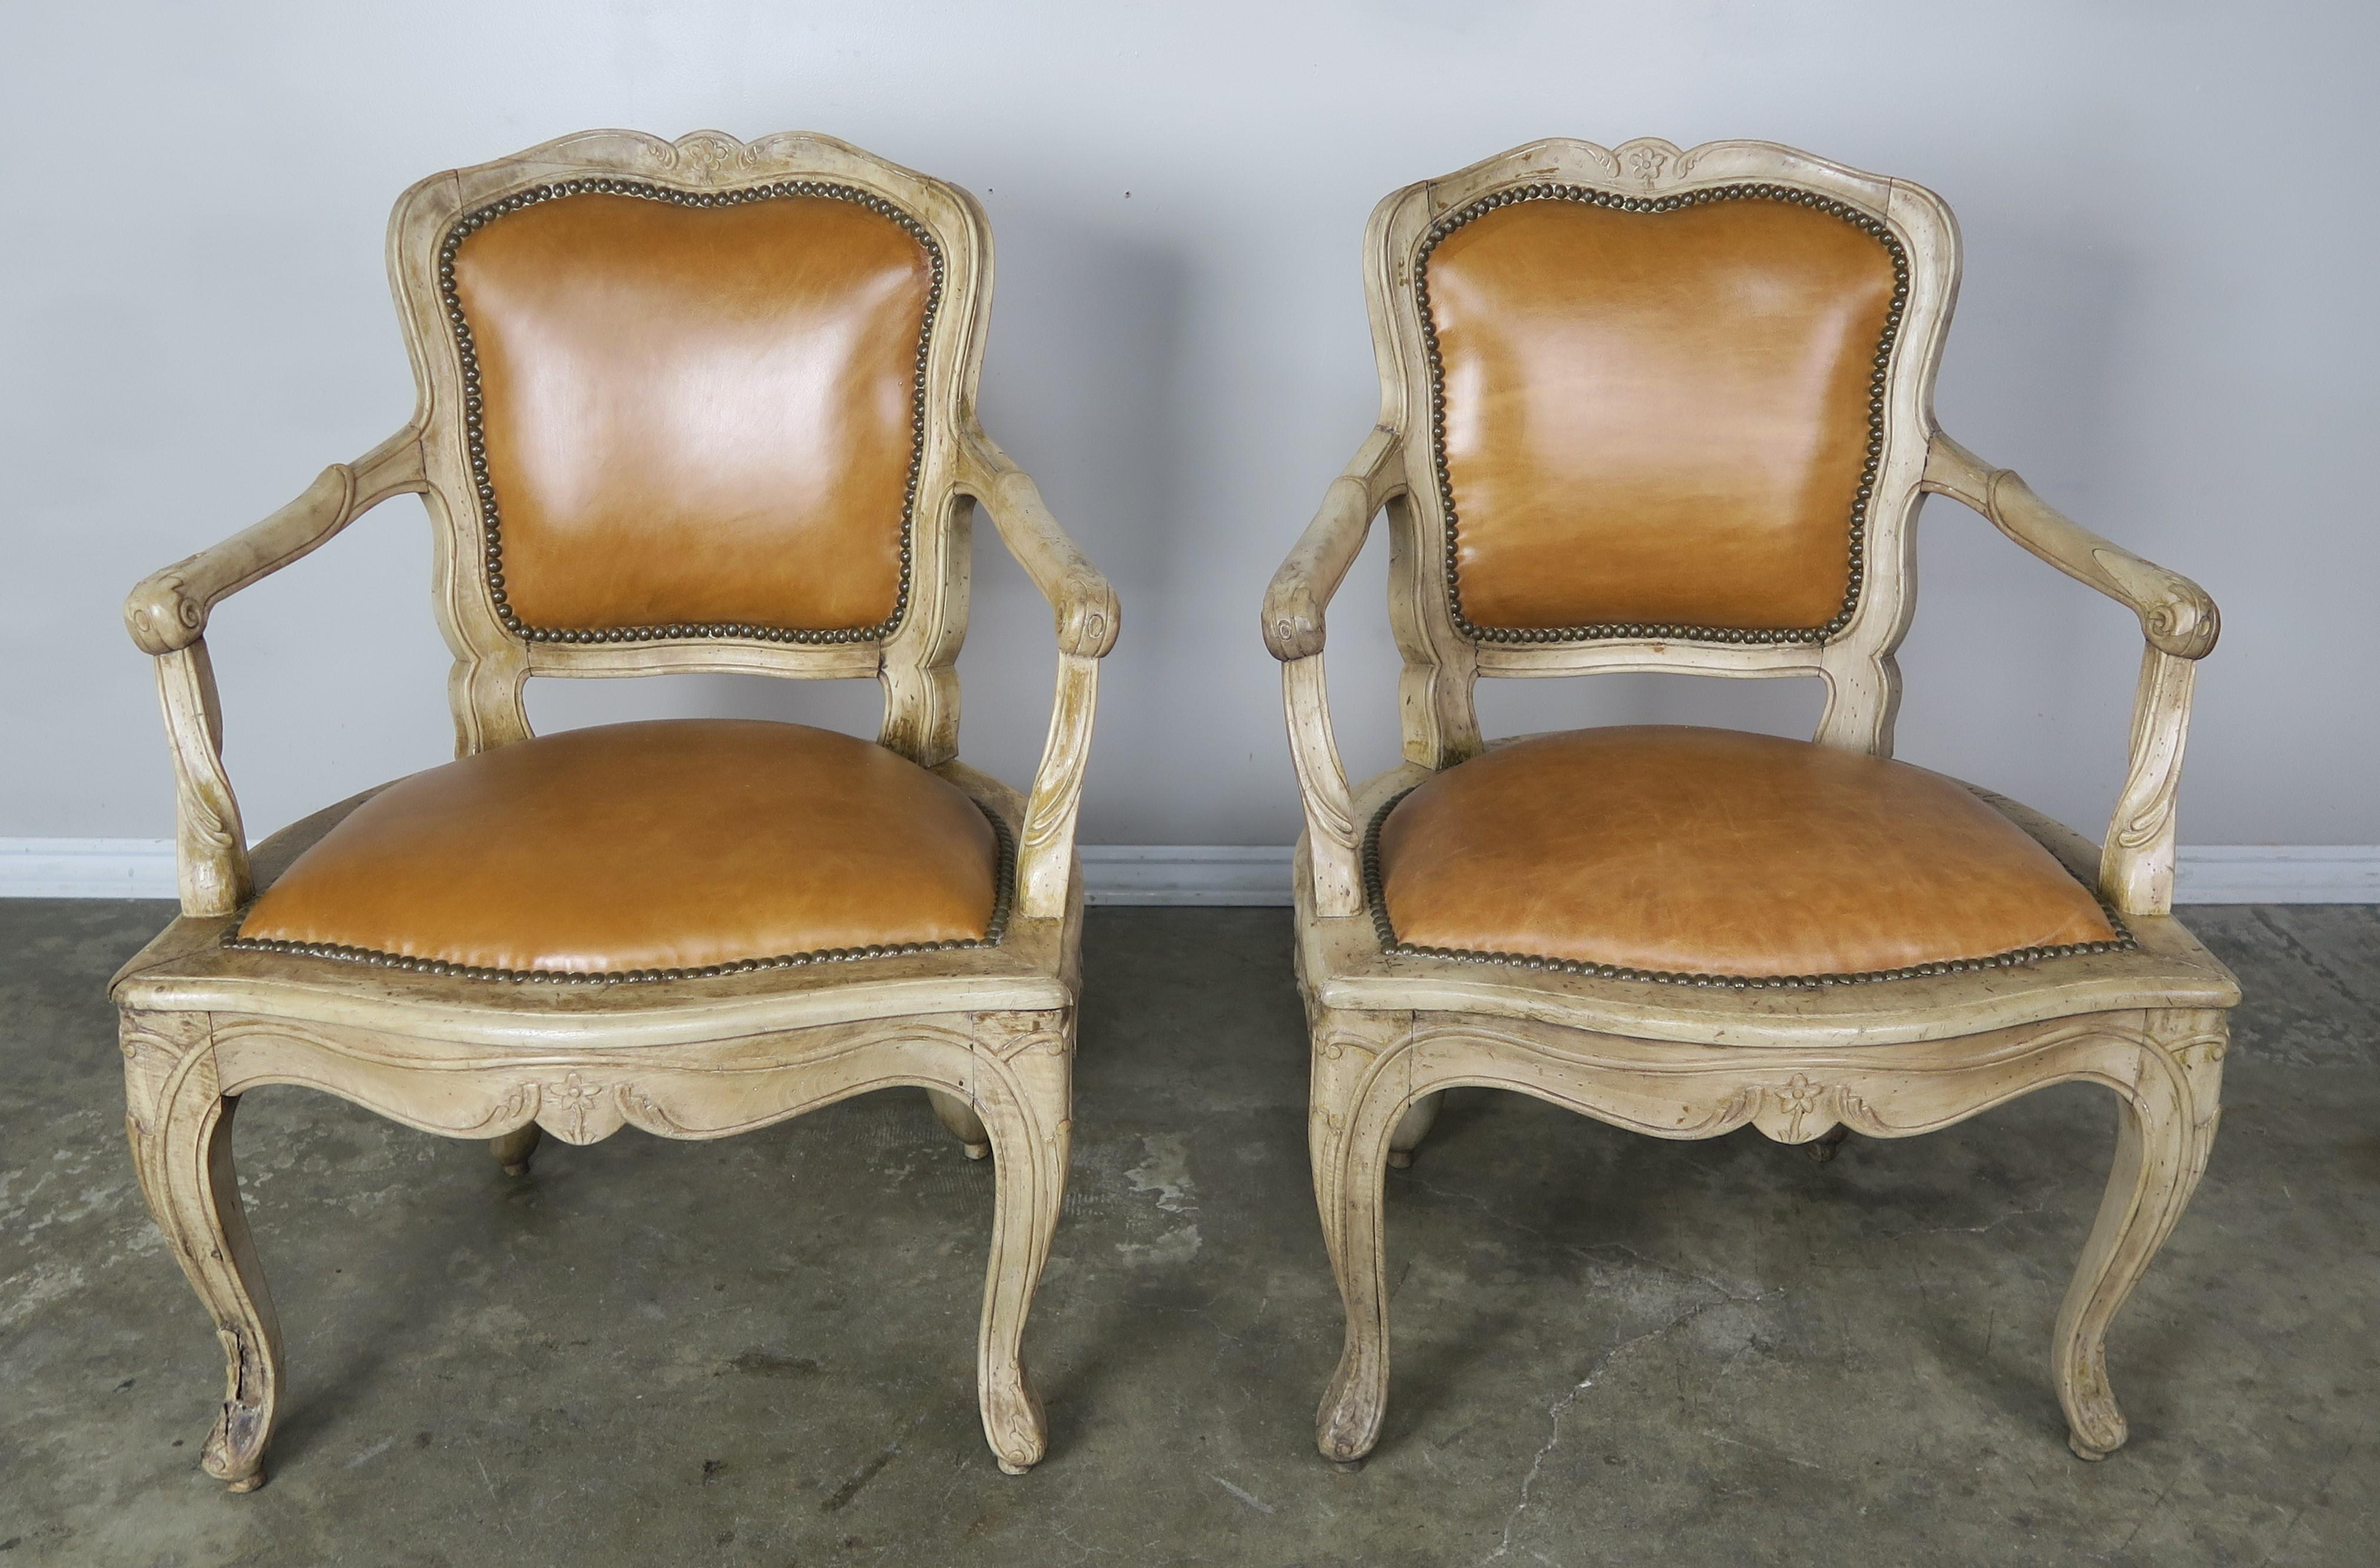 Pair of French walnut Louis XV style carved bleached walnut armchairs upholstered in a caramel colored leather with brass nailhead trim detail. The armchairs stand on cabriole legs that end in rams head feet.
Measures: Seat height 17